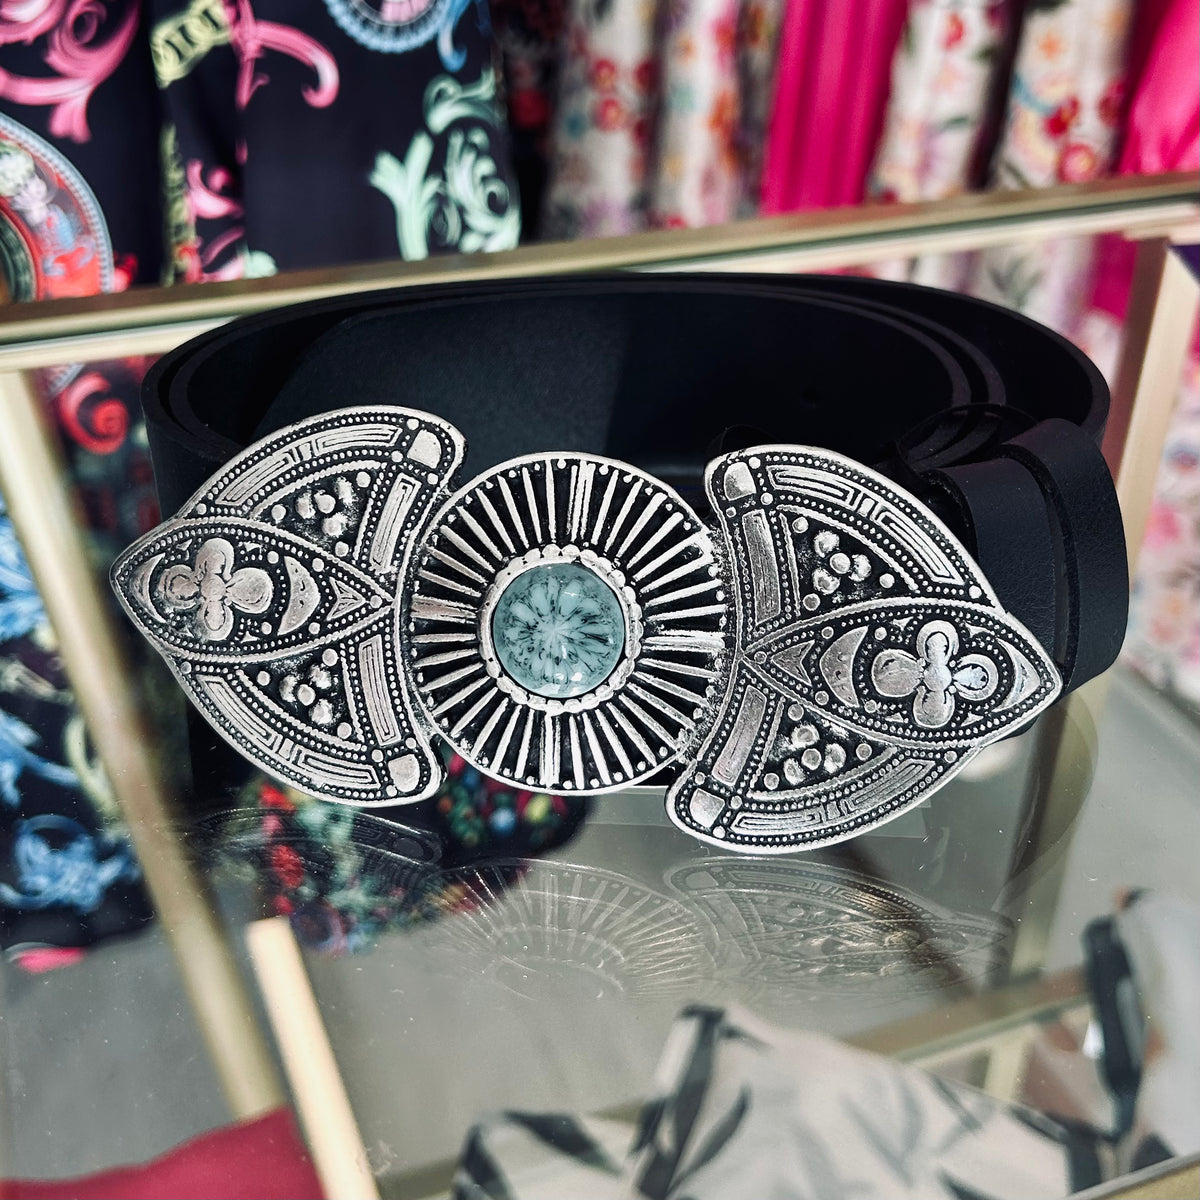 Black leather embossed belt with a silver buckle intricate design with a turquoise stone in the centre. Made in Greece